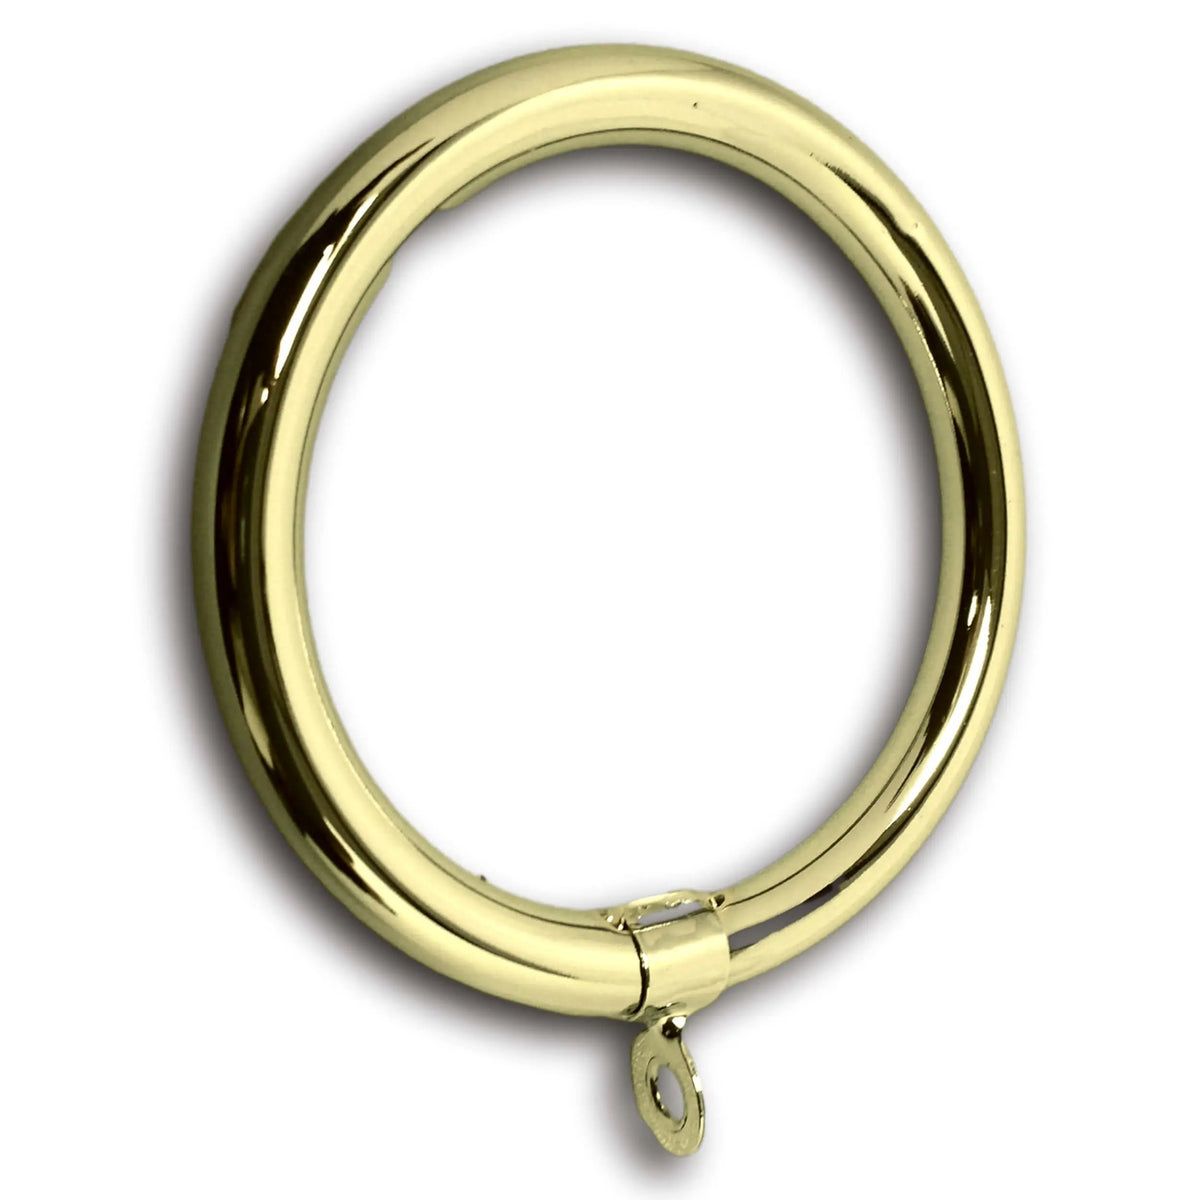 Curtain Ring for 1" Tubing Components for 1" Od Tubing, Drapery Hardware ClearPowderCoatedFinish-PleaseCall Trade Diversified